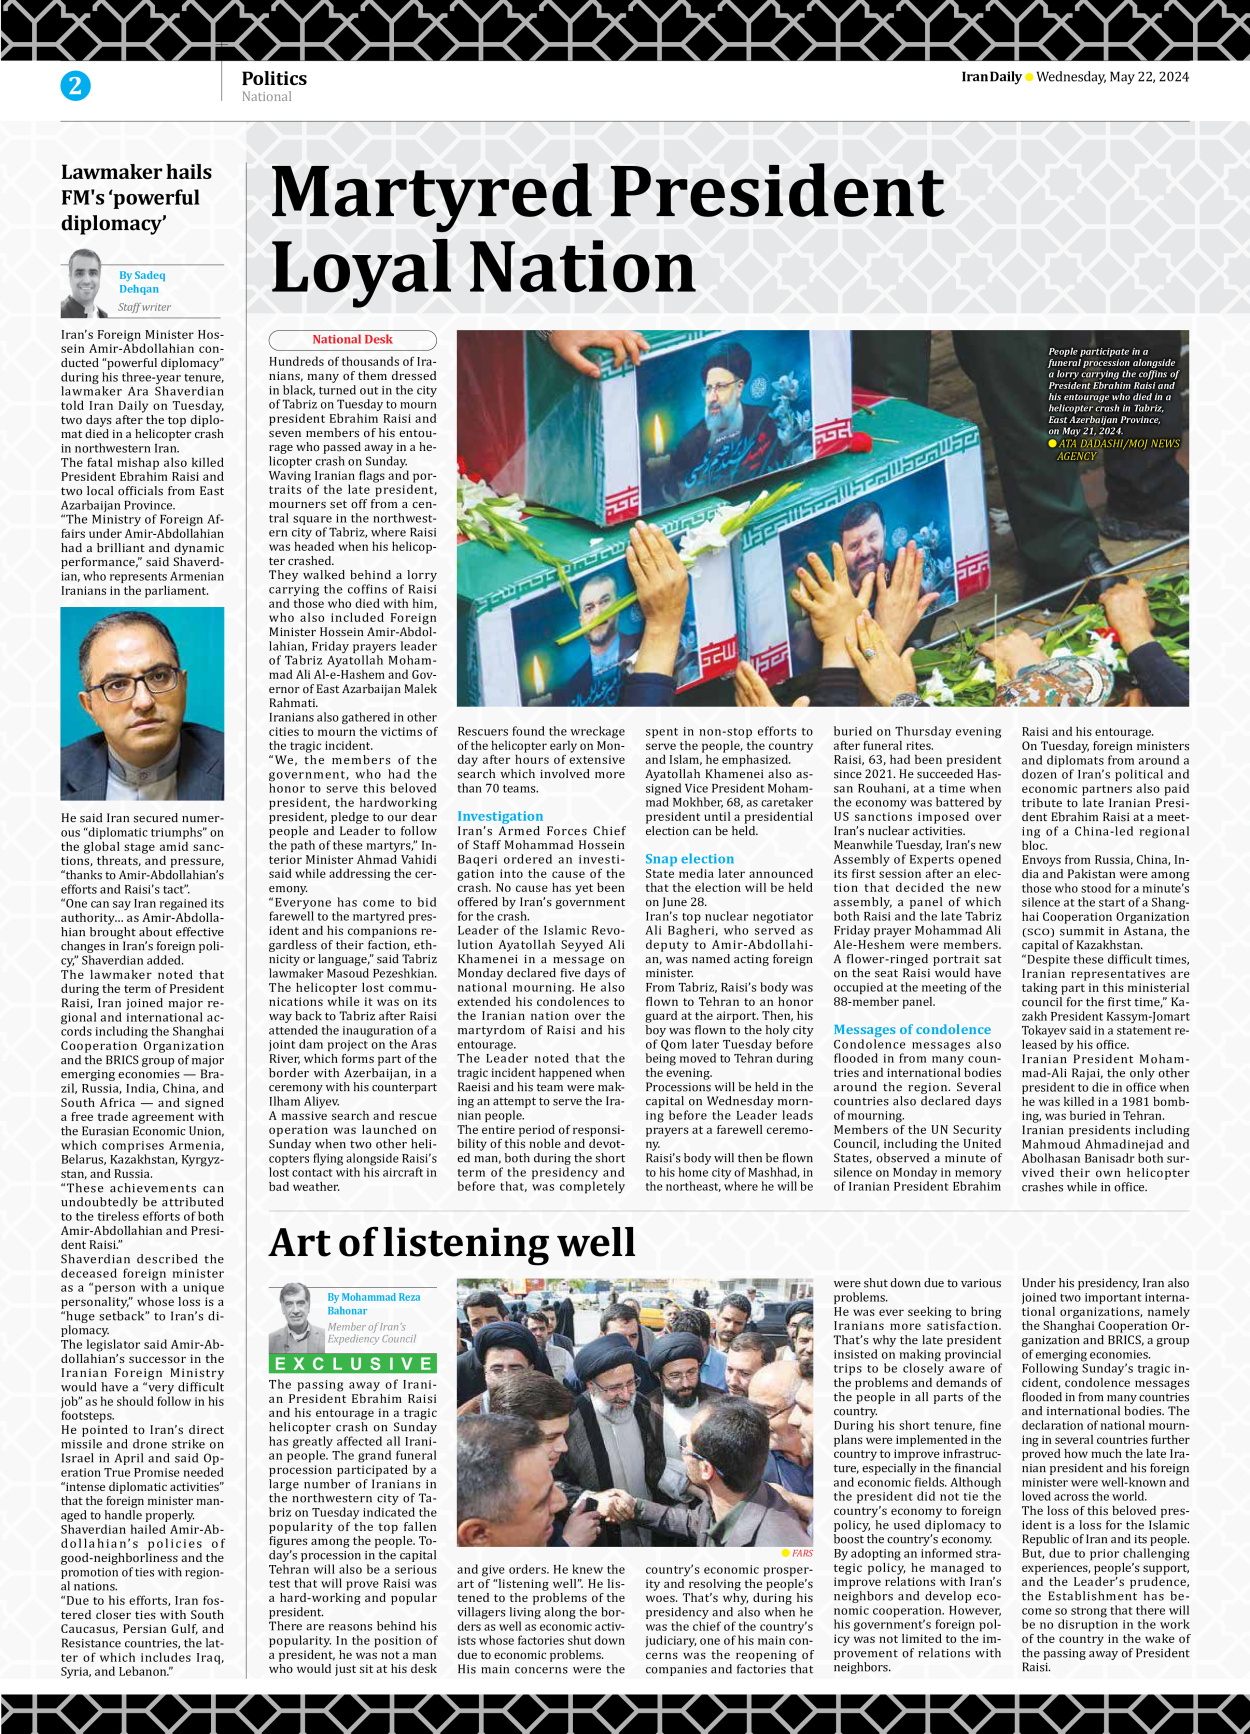 Iran Daily - Number Seven Thousand Five Hundred and Sixty Four - 22 May 2024 - Page 2